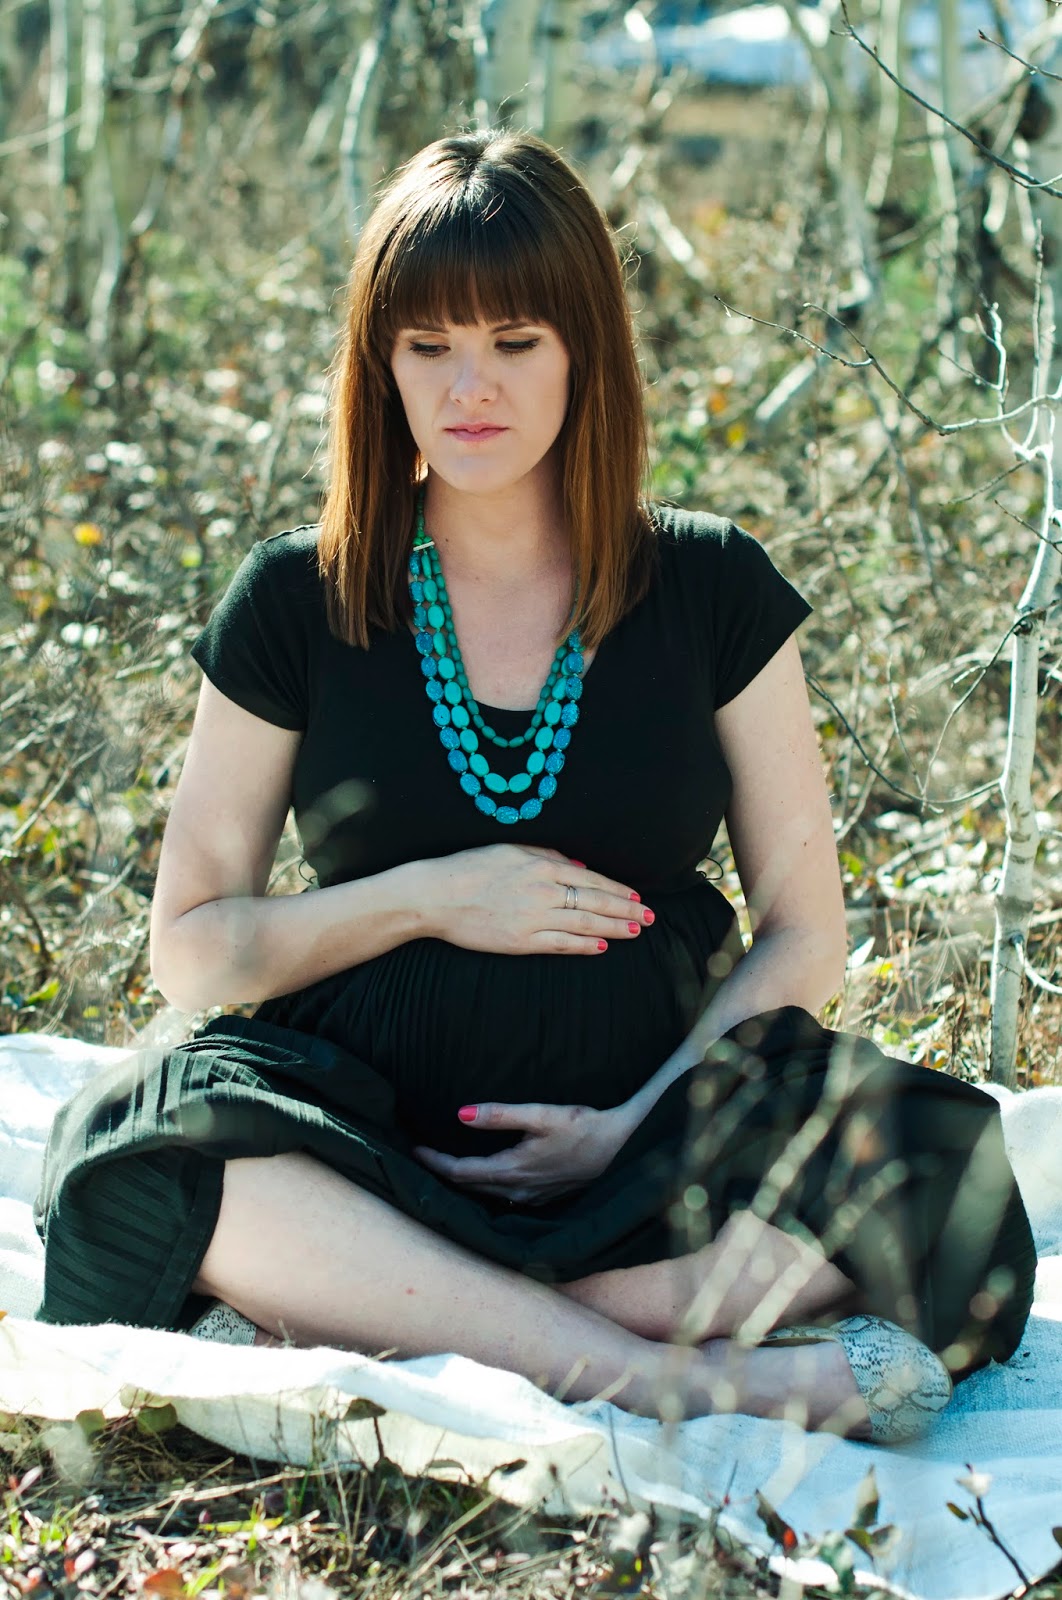 Utah Mountain Maternity Session with J&H Photography